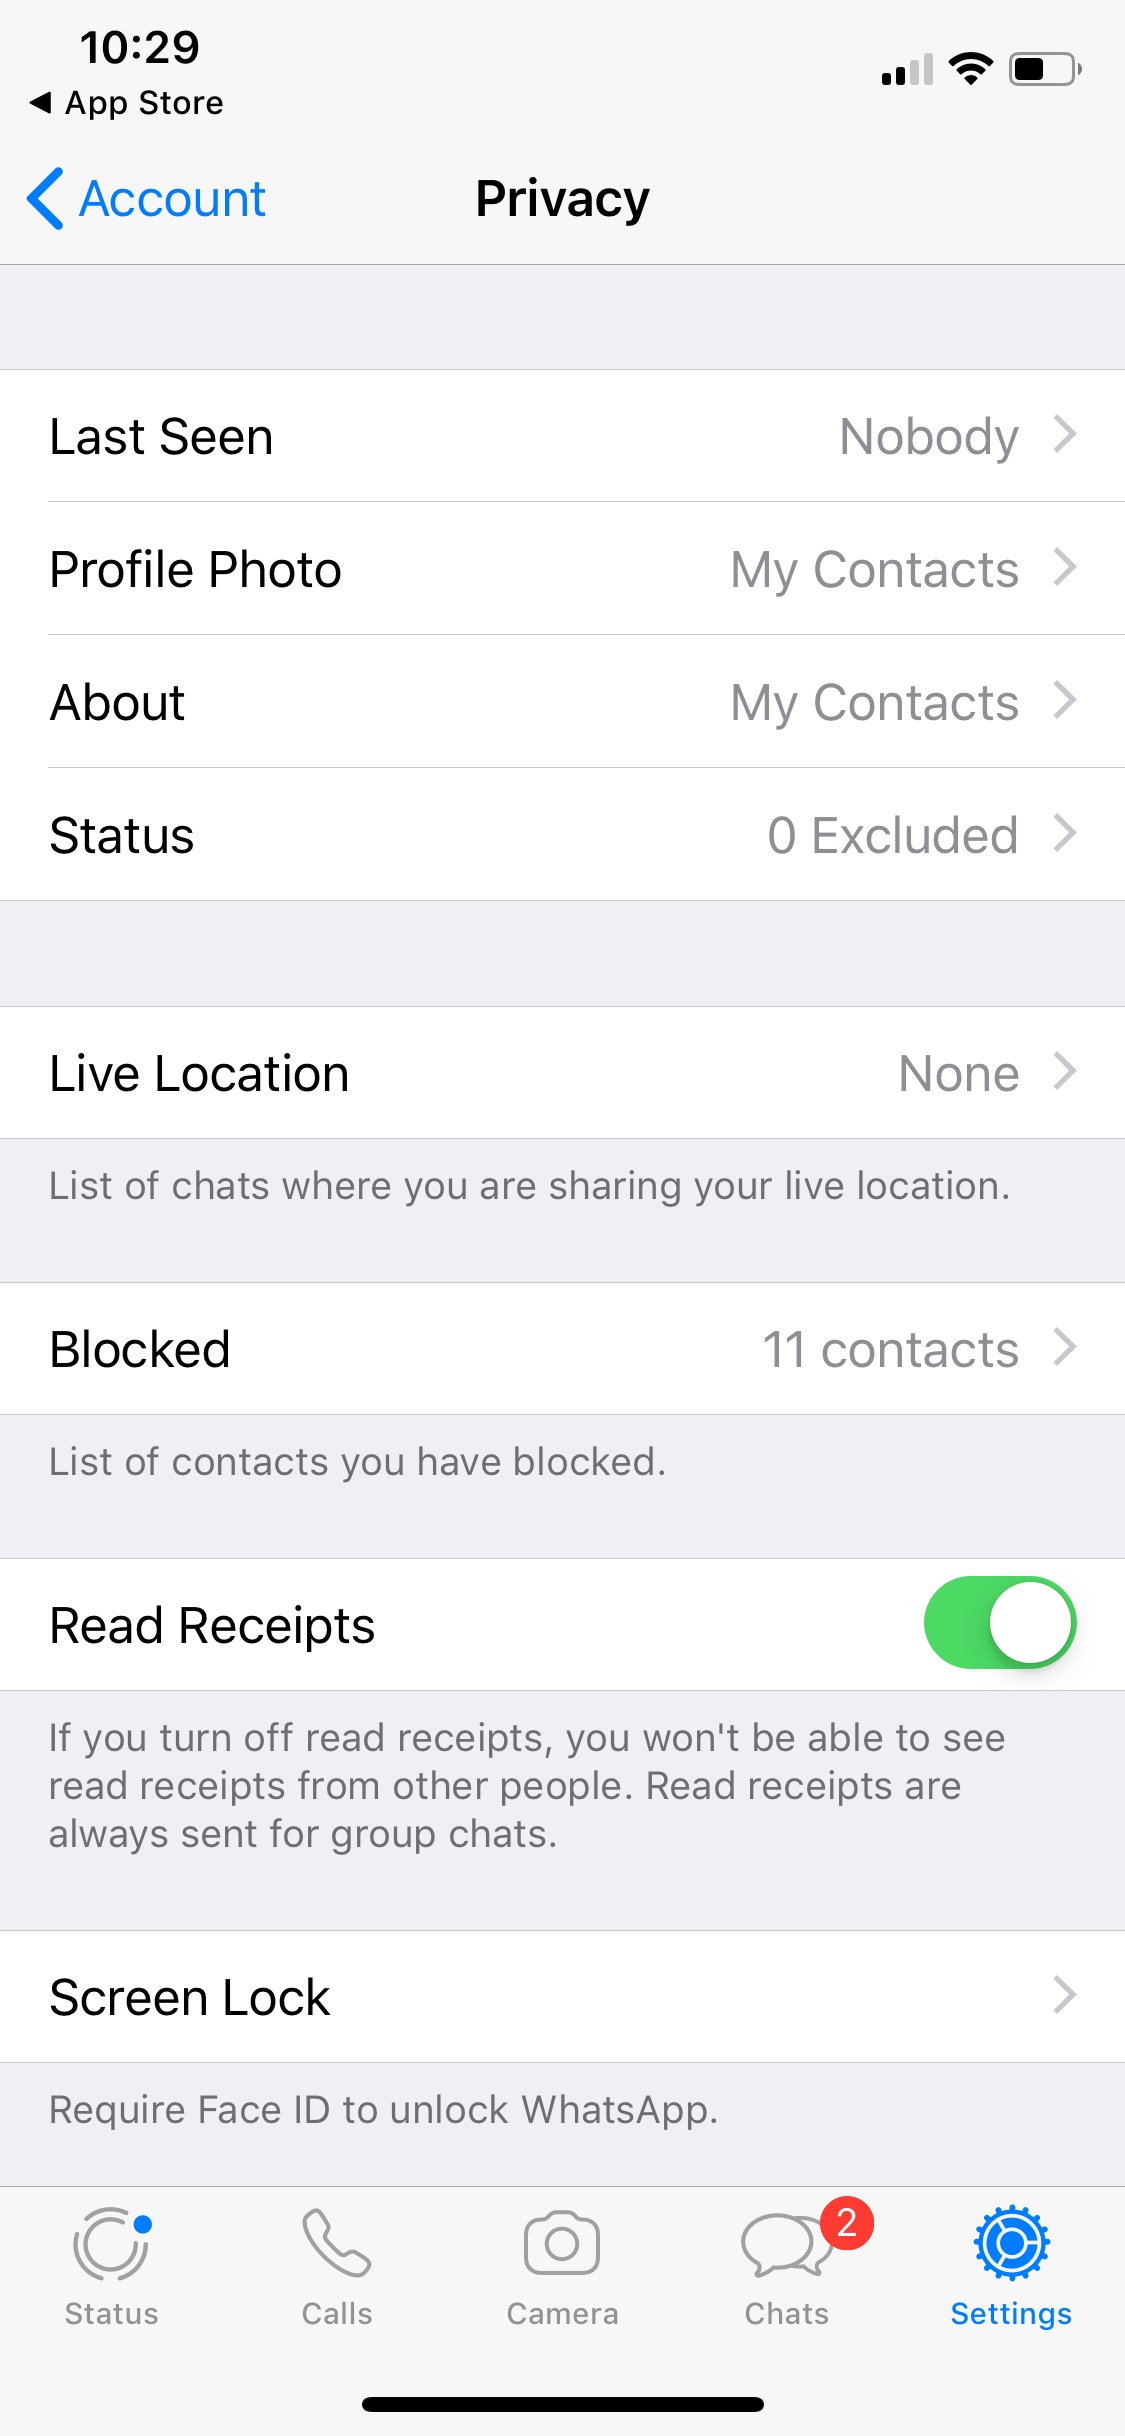 WhatsApp Messenger Can Now Be Locked Down Using Face ID or Touch ID